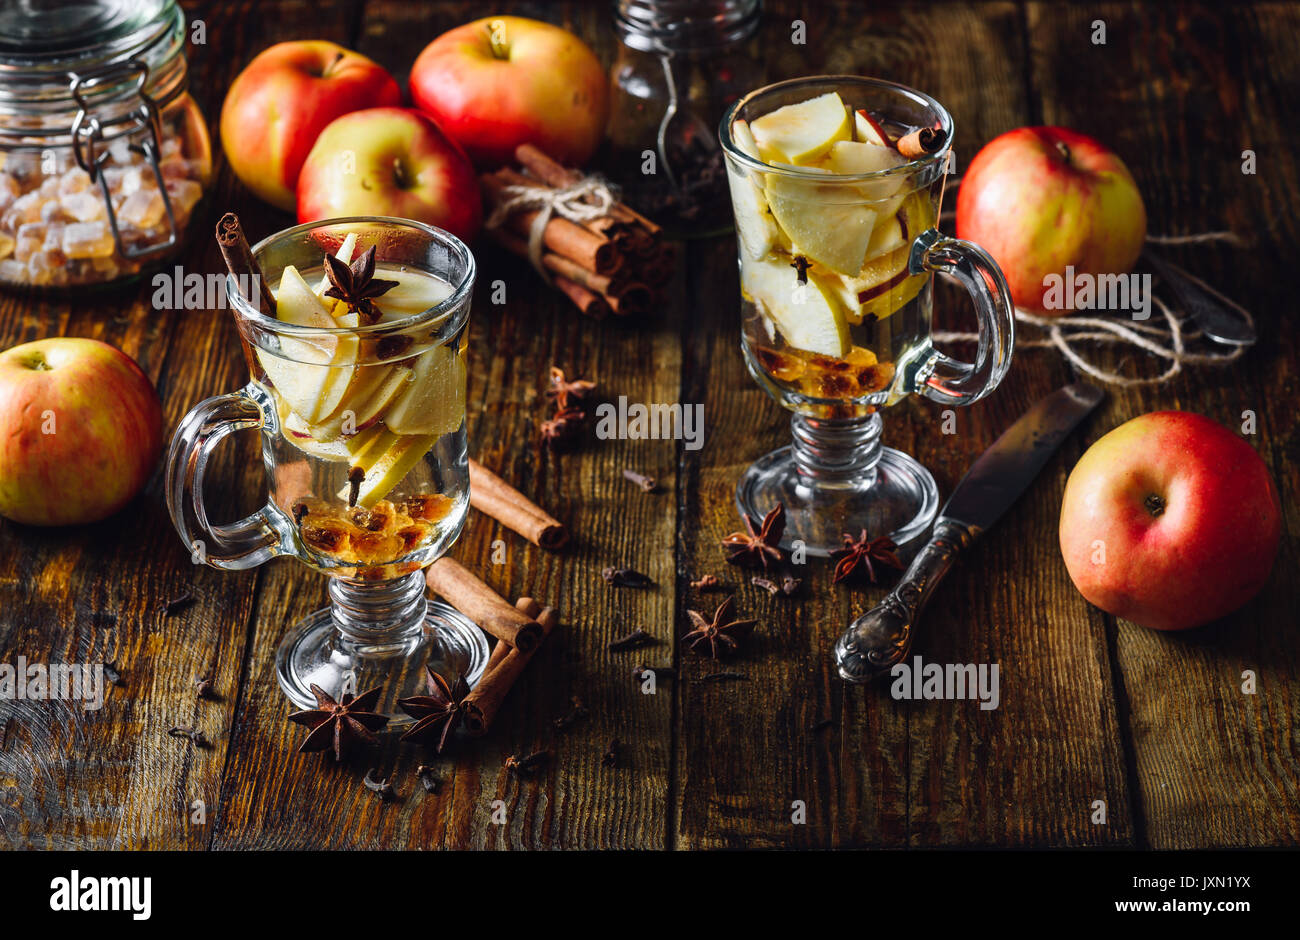 Glasses of Christmas Apple Drink with Clove, Cinnamon, Anise Star and Dark Candy Sugar. All Ingredients and Some Kitchen utensils on Wooden Table. Ver Stock Photo